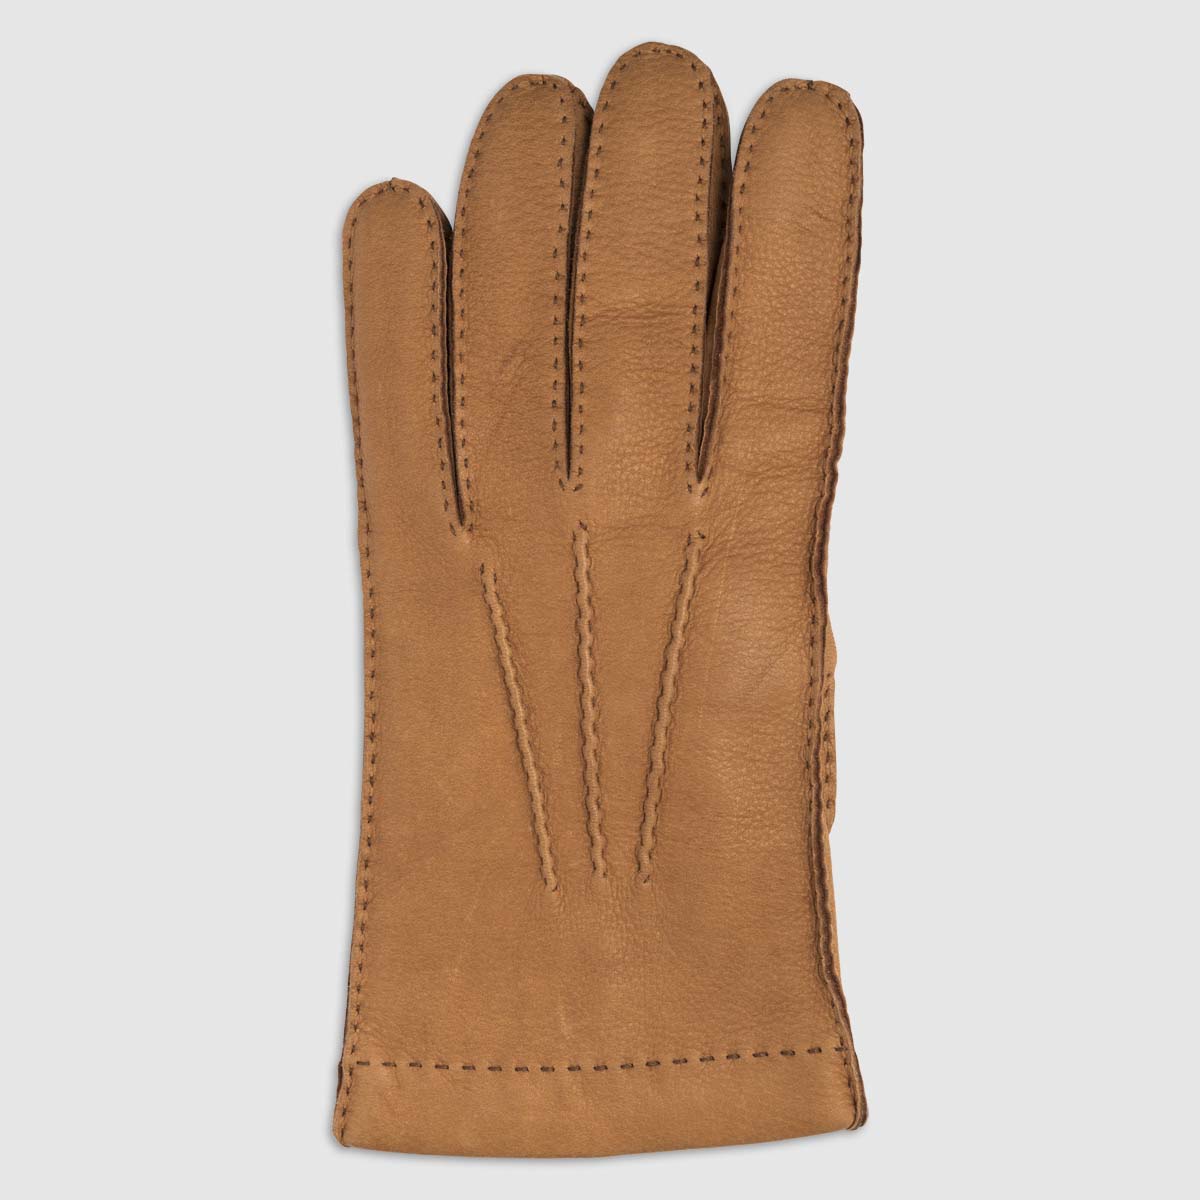 Hand Stitched Deer Leather Glove with Cashmere Lining Alpo Guanti on sale 2022